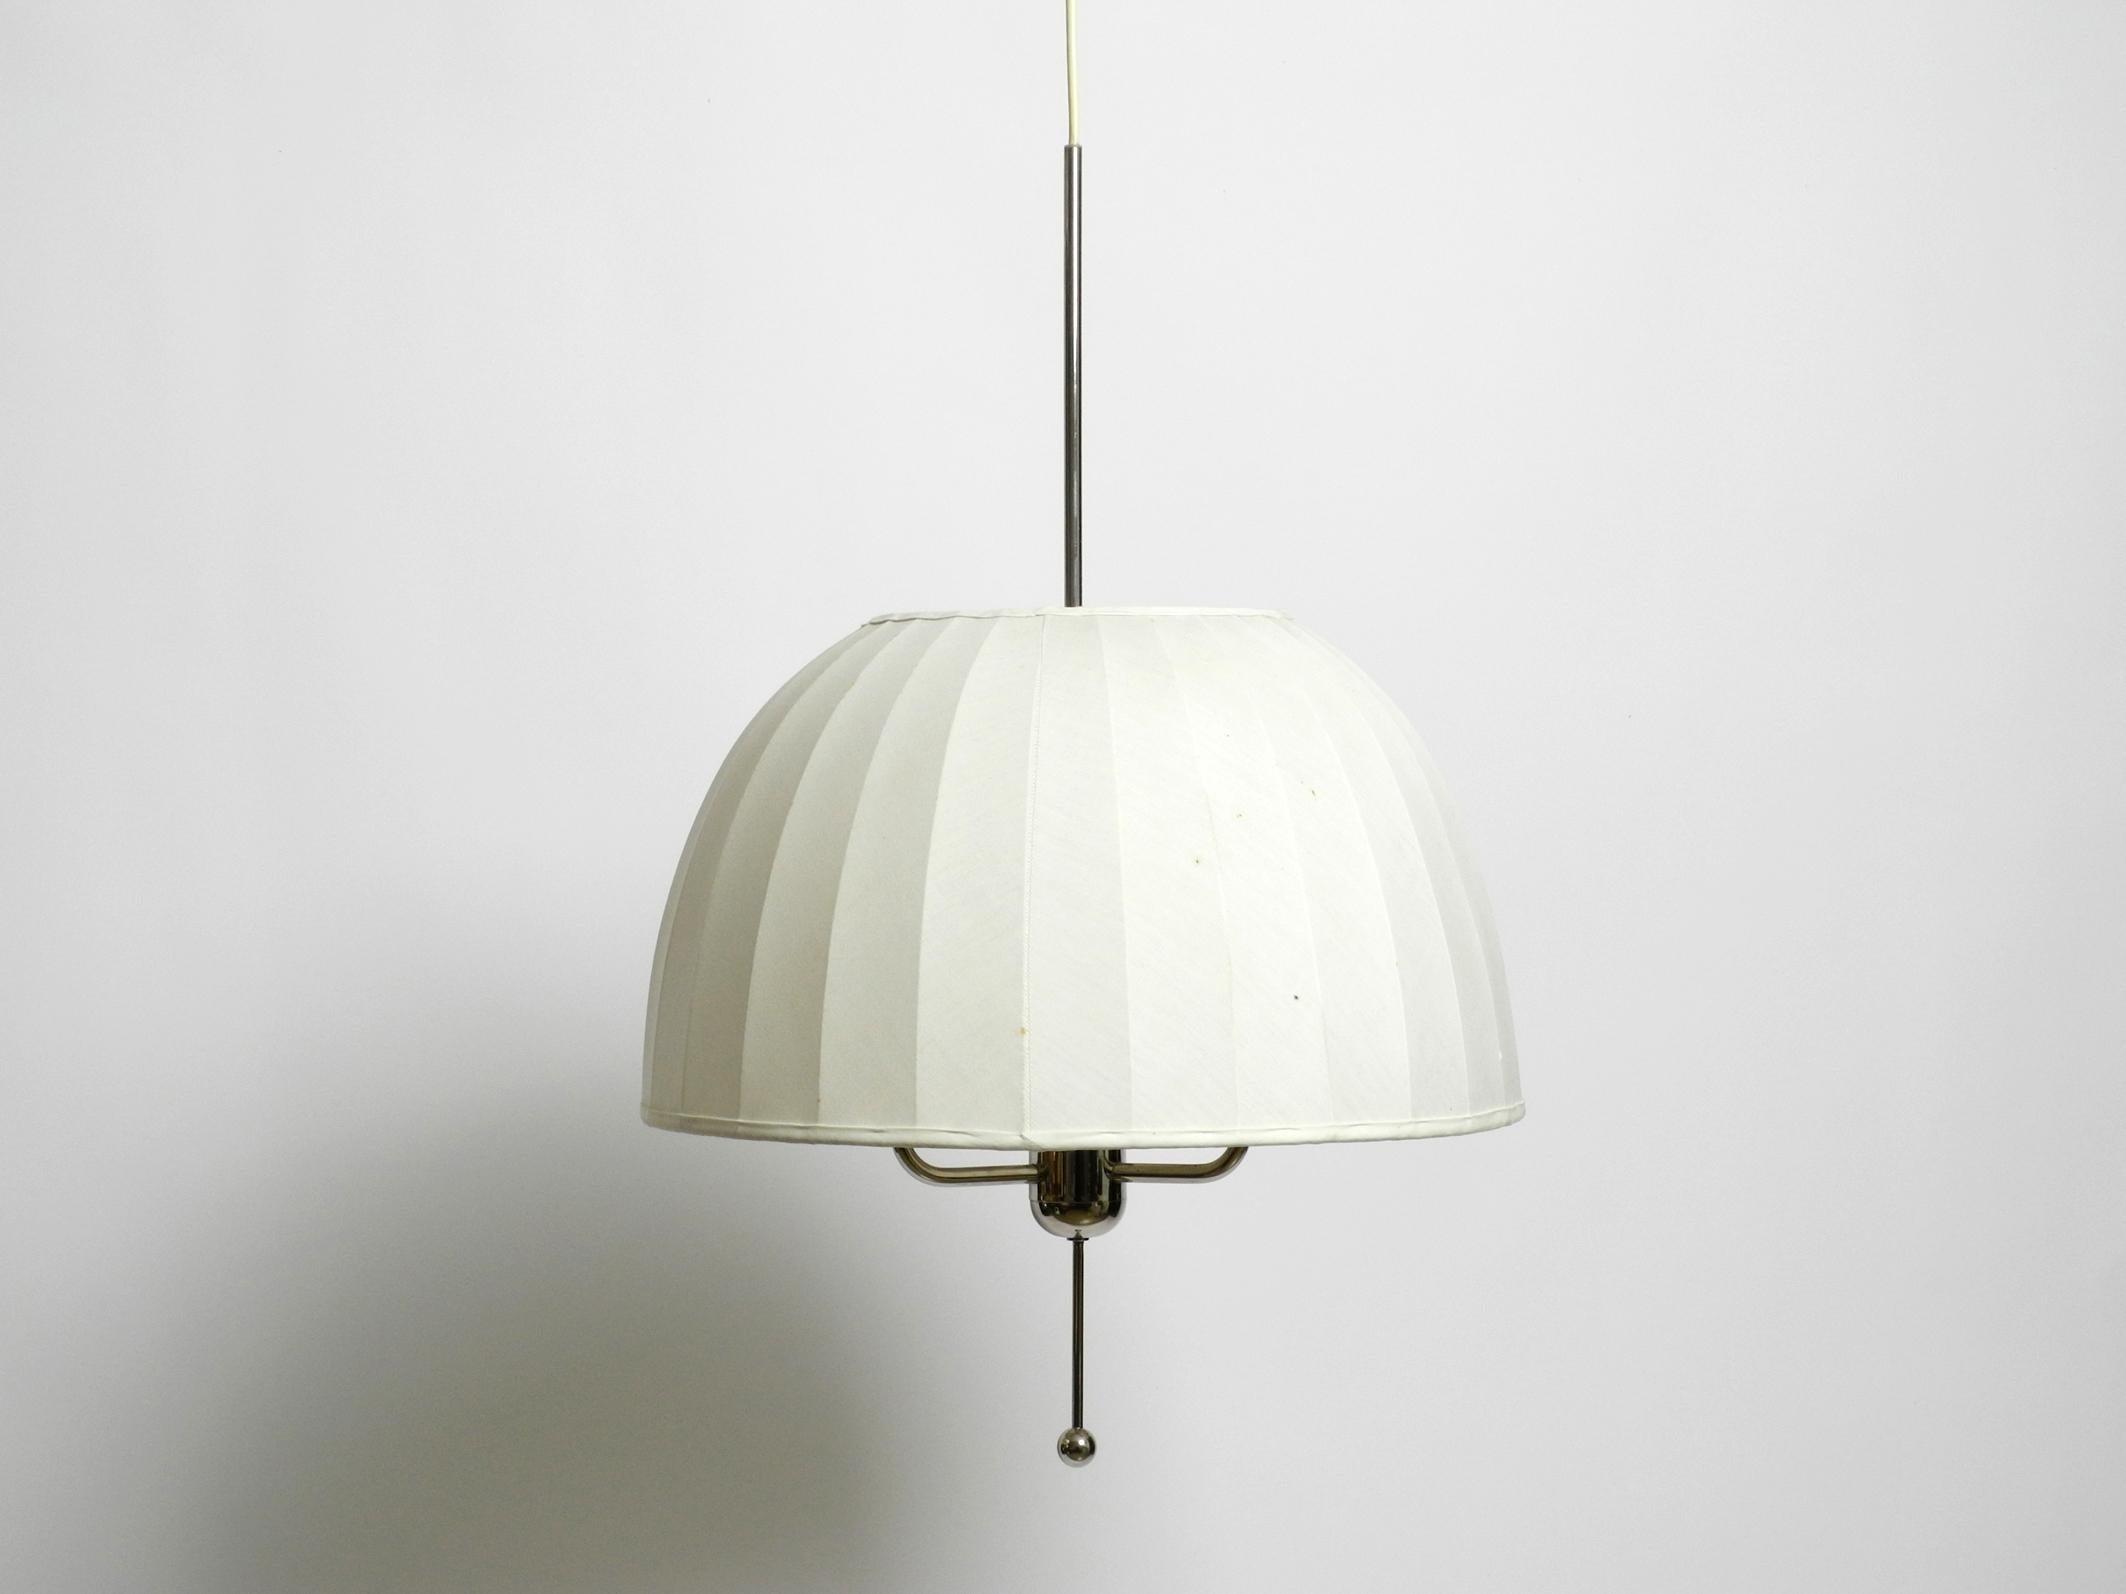 1960s pendant lamp “Carolin” model T549 by Hans-Agne Jakobsson for Markaryd In Good Condition For Sale In München, DE